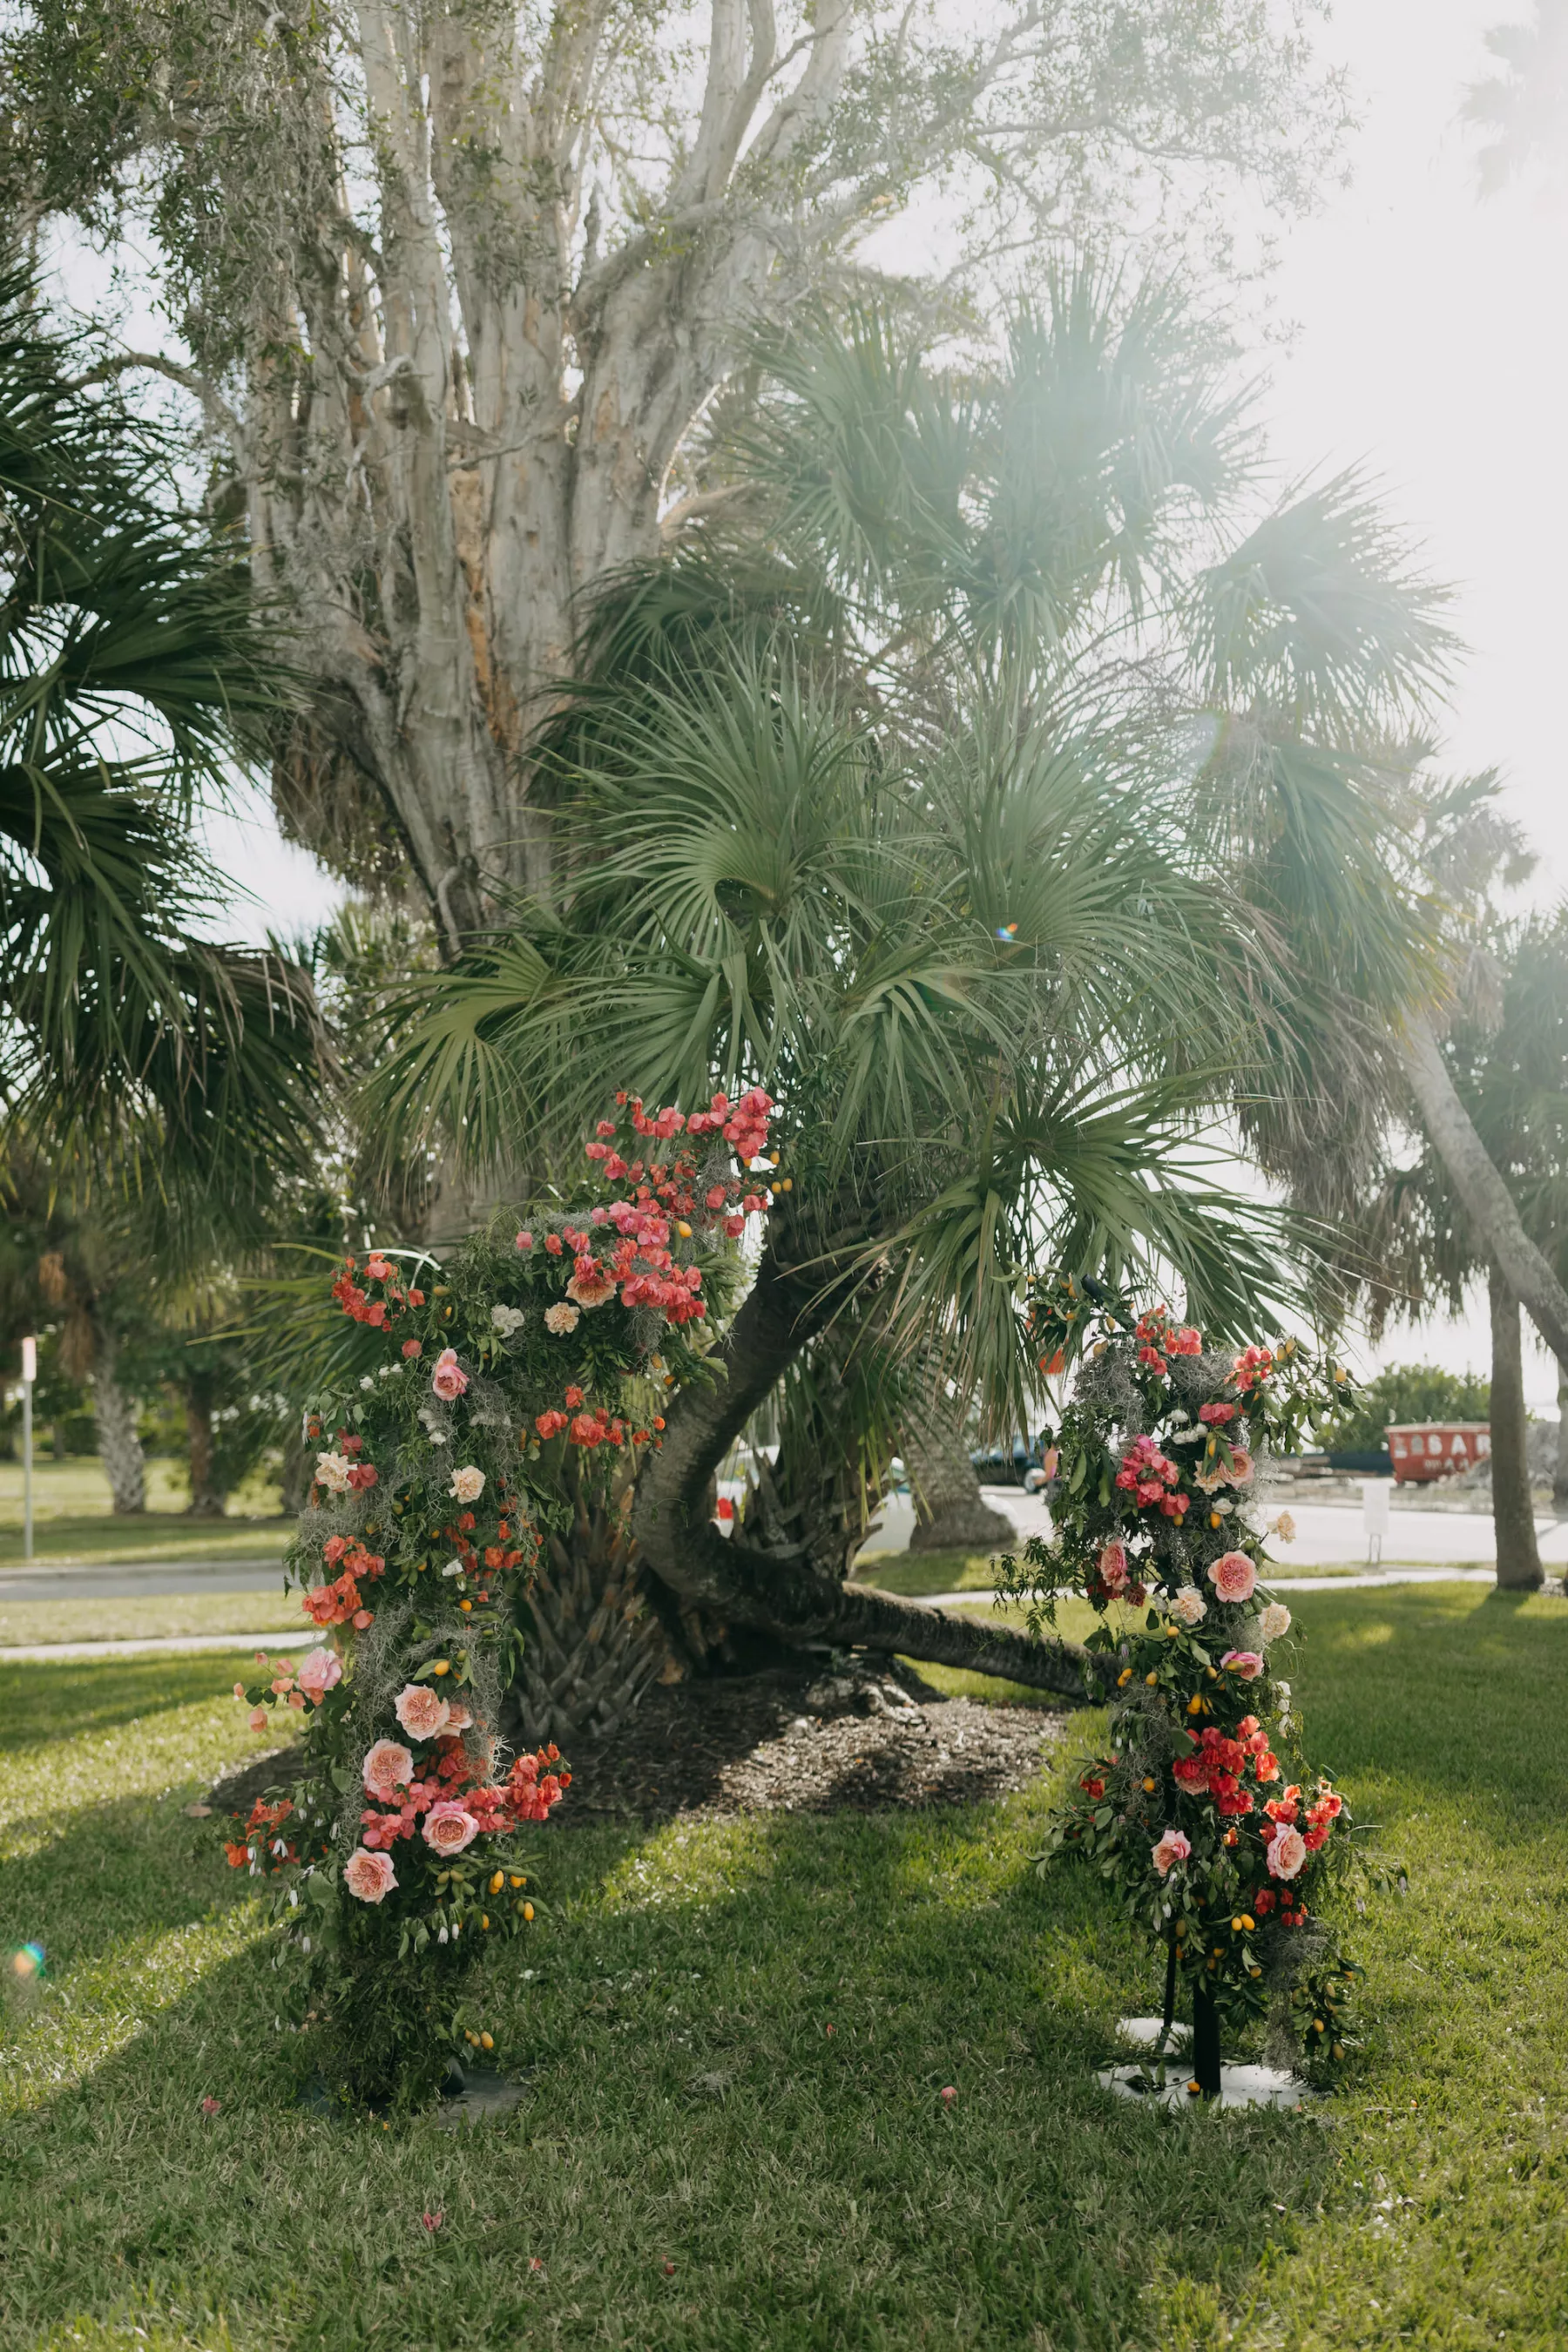 Old Florida Inspired Flower Arch Decor Ideas | Pink Bougainvillea, Garden Roses, White Carnations, and Greenery | Dunedin Venue The Fenway